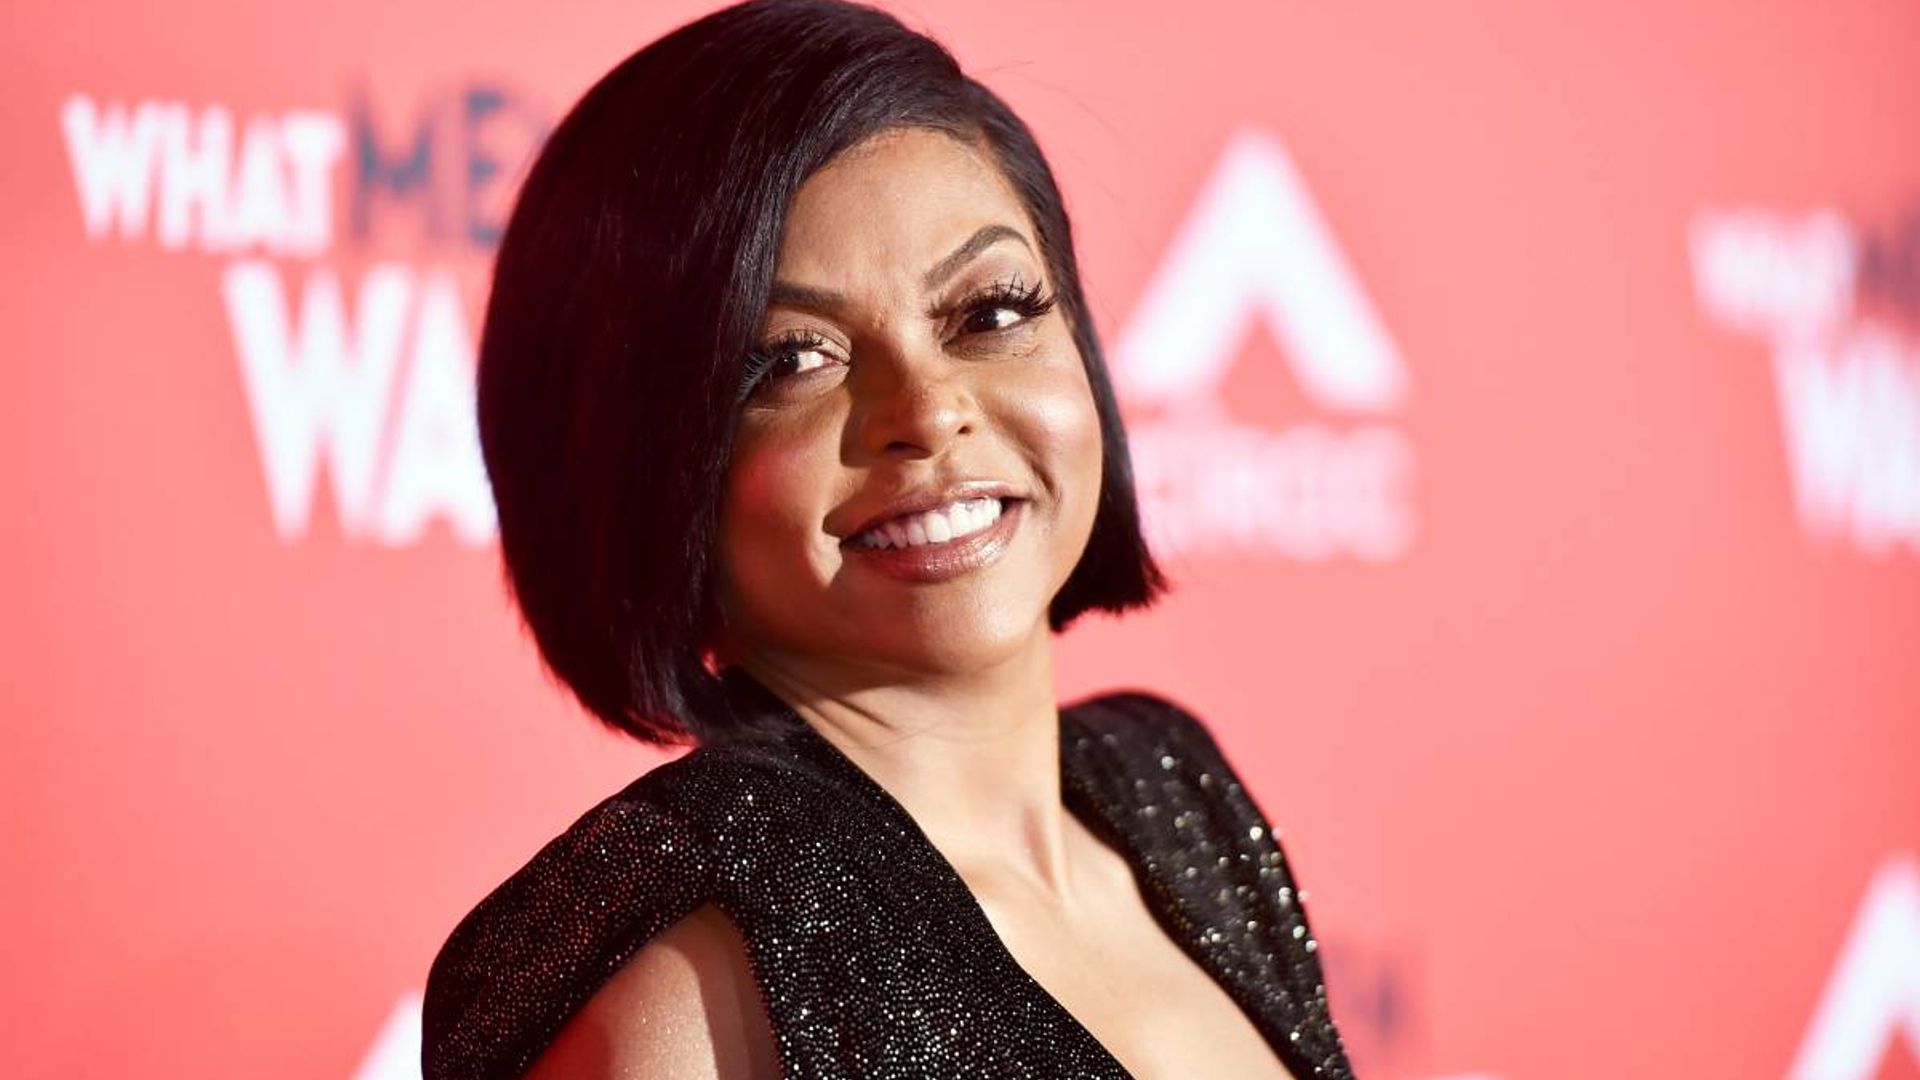 Taraji P. Henson turns up the heat in a showstopping mini dress you need to see